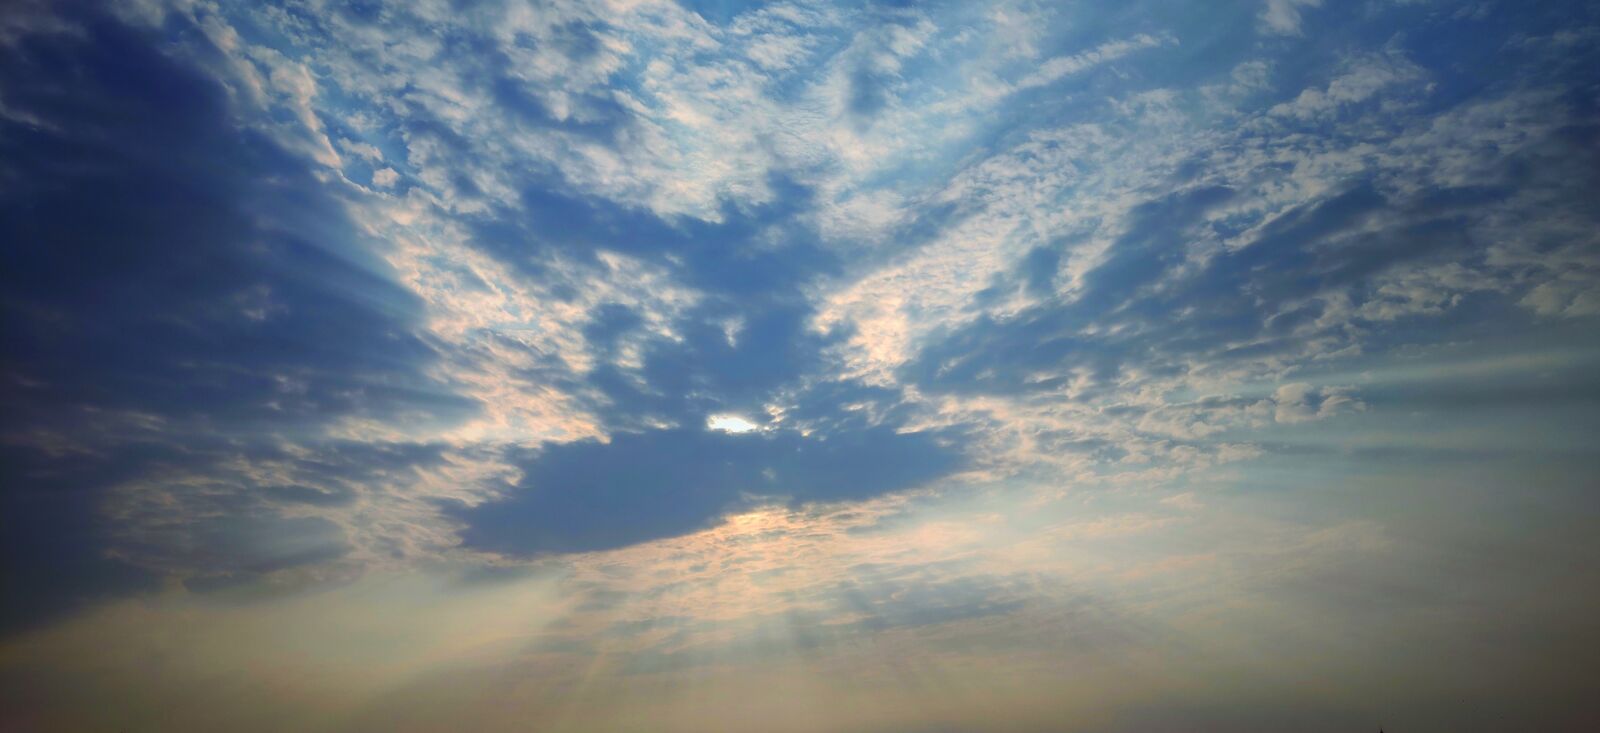 OnePlus A6010 sample photo. Sunrise, morning, clouds photography